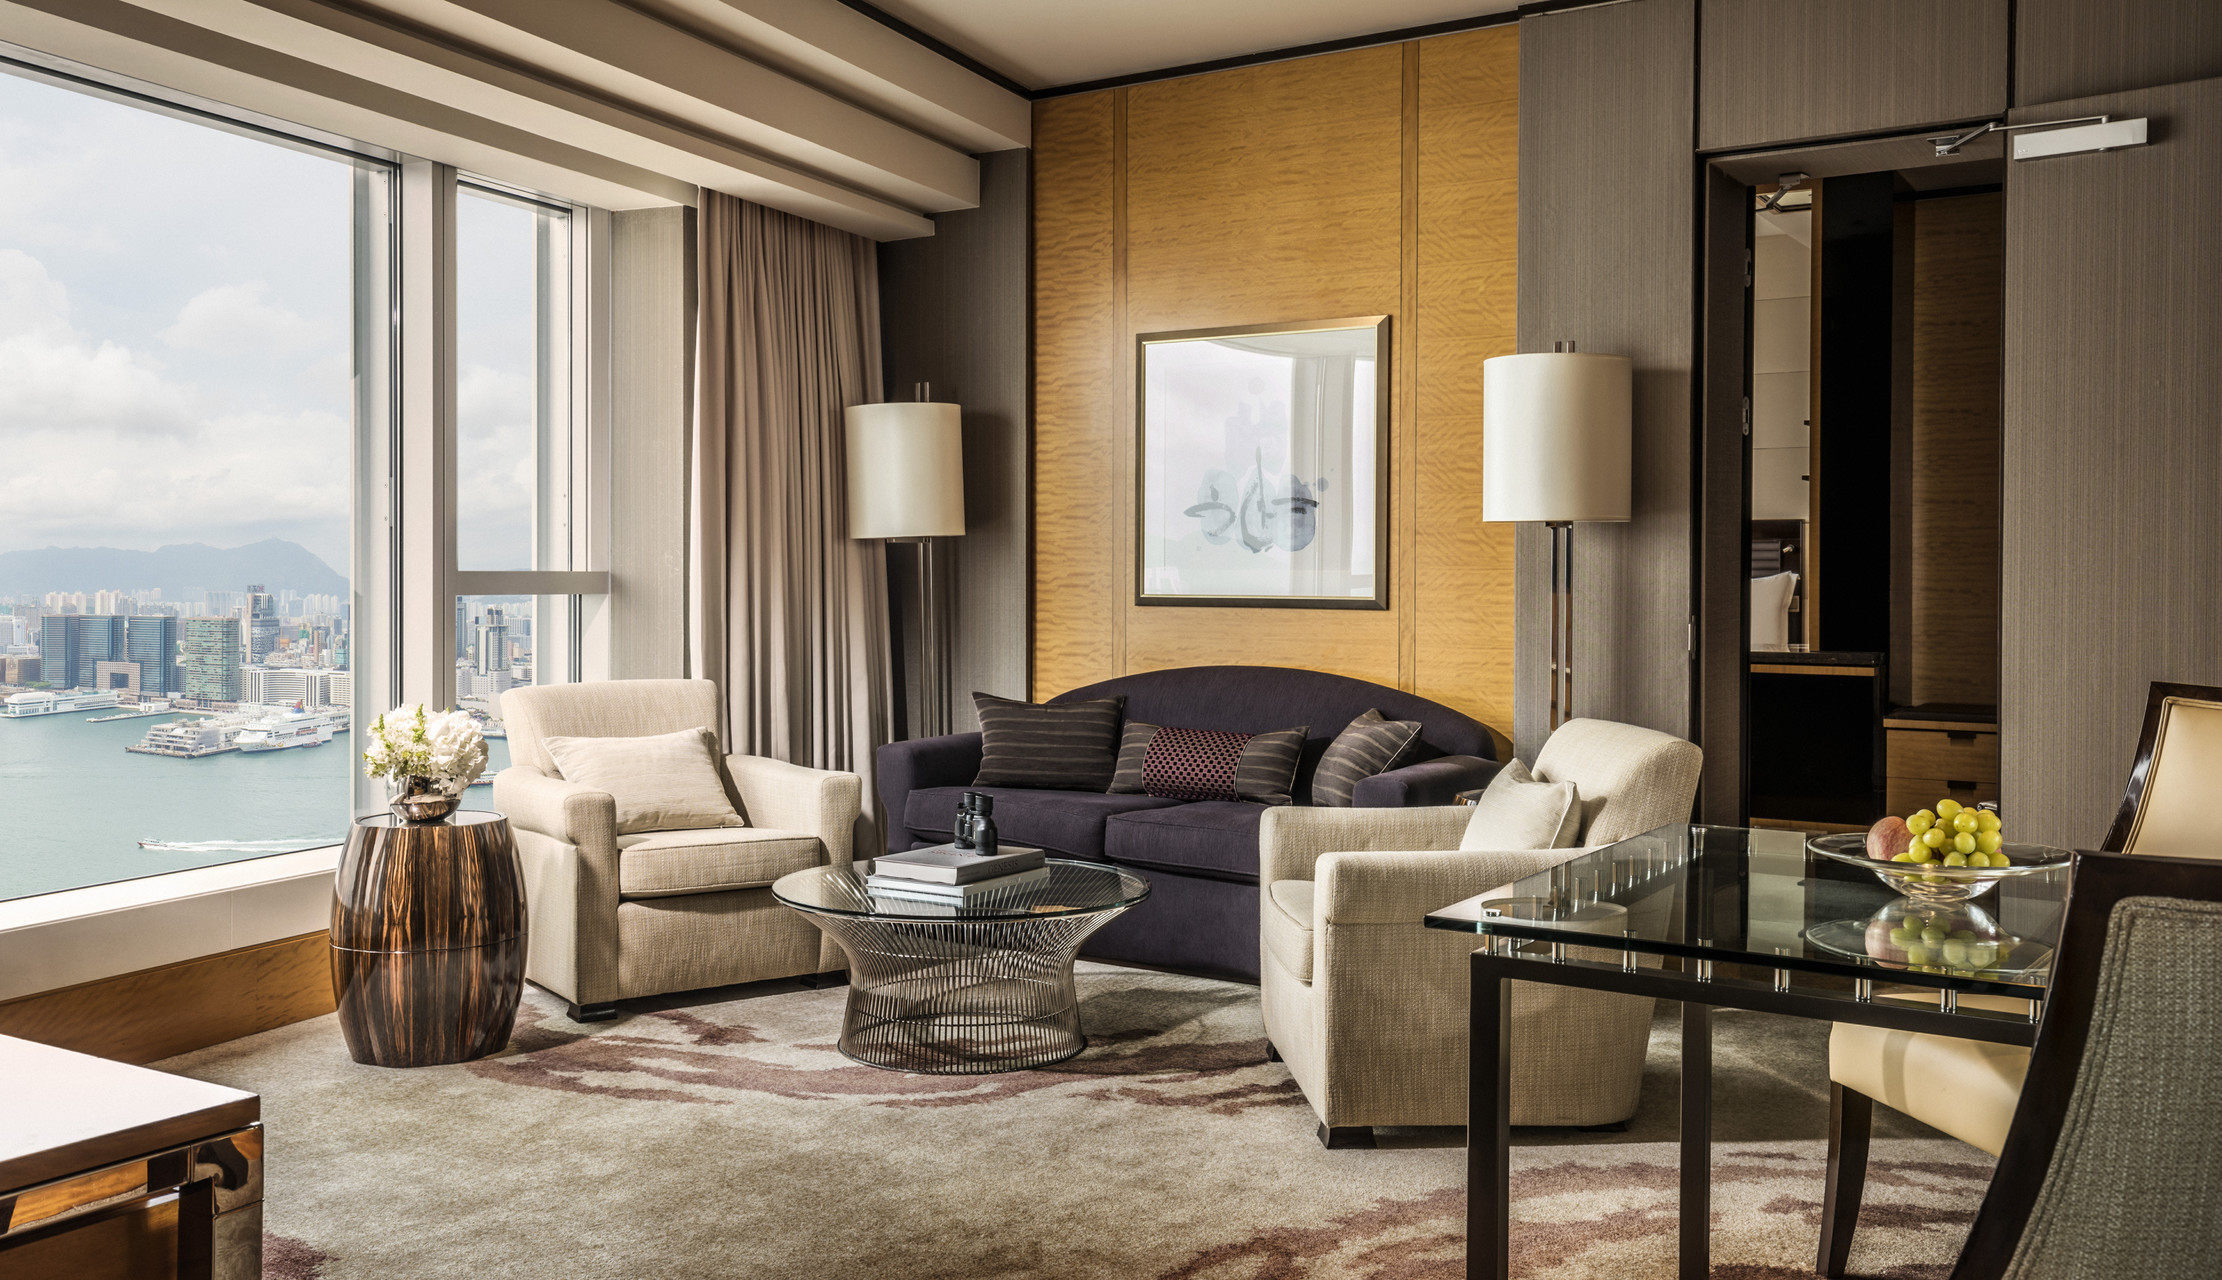 A luxury hotel room at the Harbour View in Hong Kong. Photo: Four Seasons